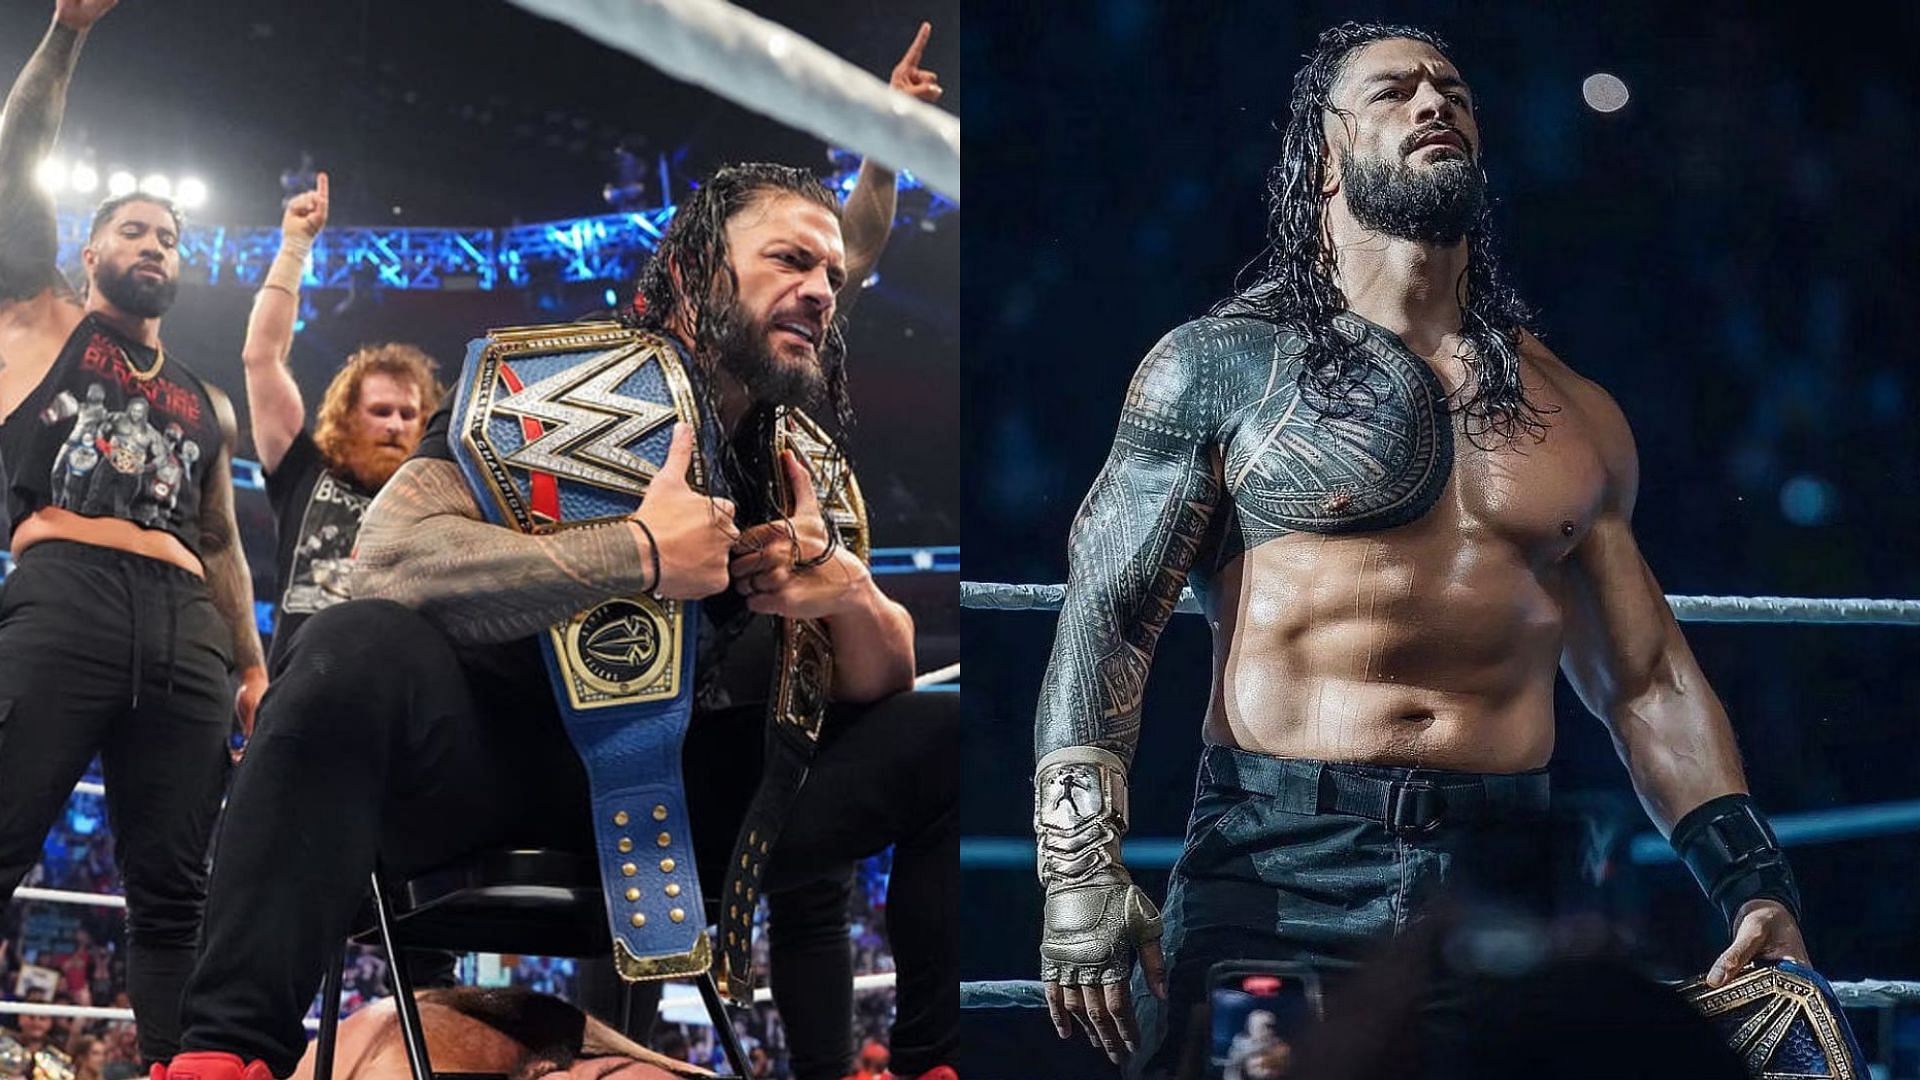 How long will Roman Reigns stay at the top?